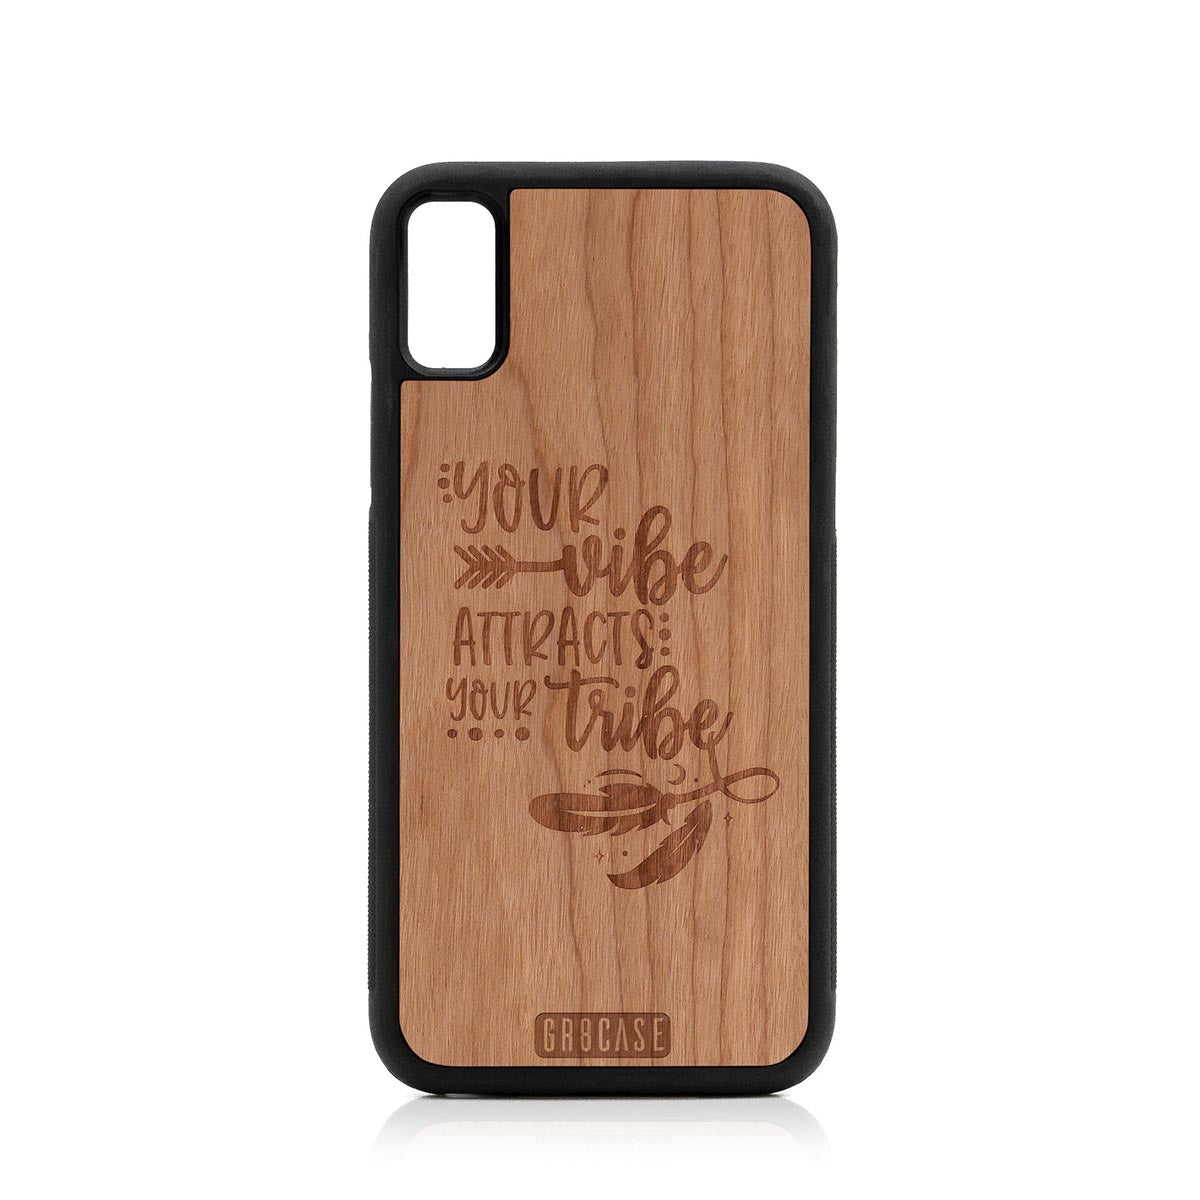 Your Vibe Attracts Your Tribe Design Wood Case For iPhone XS Max